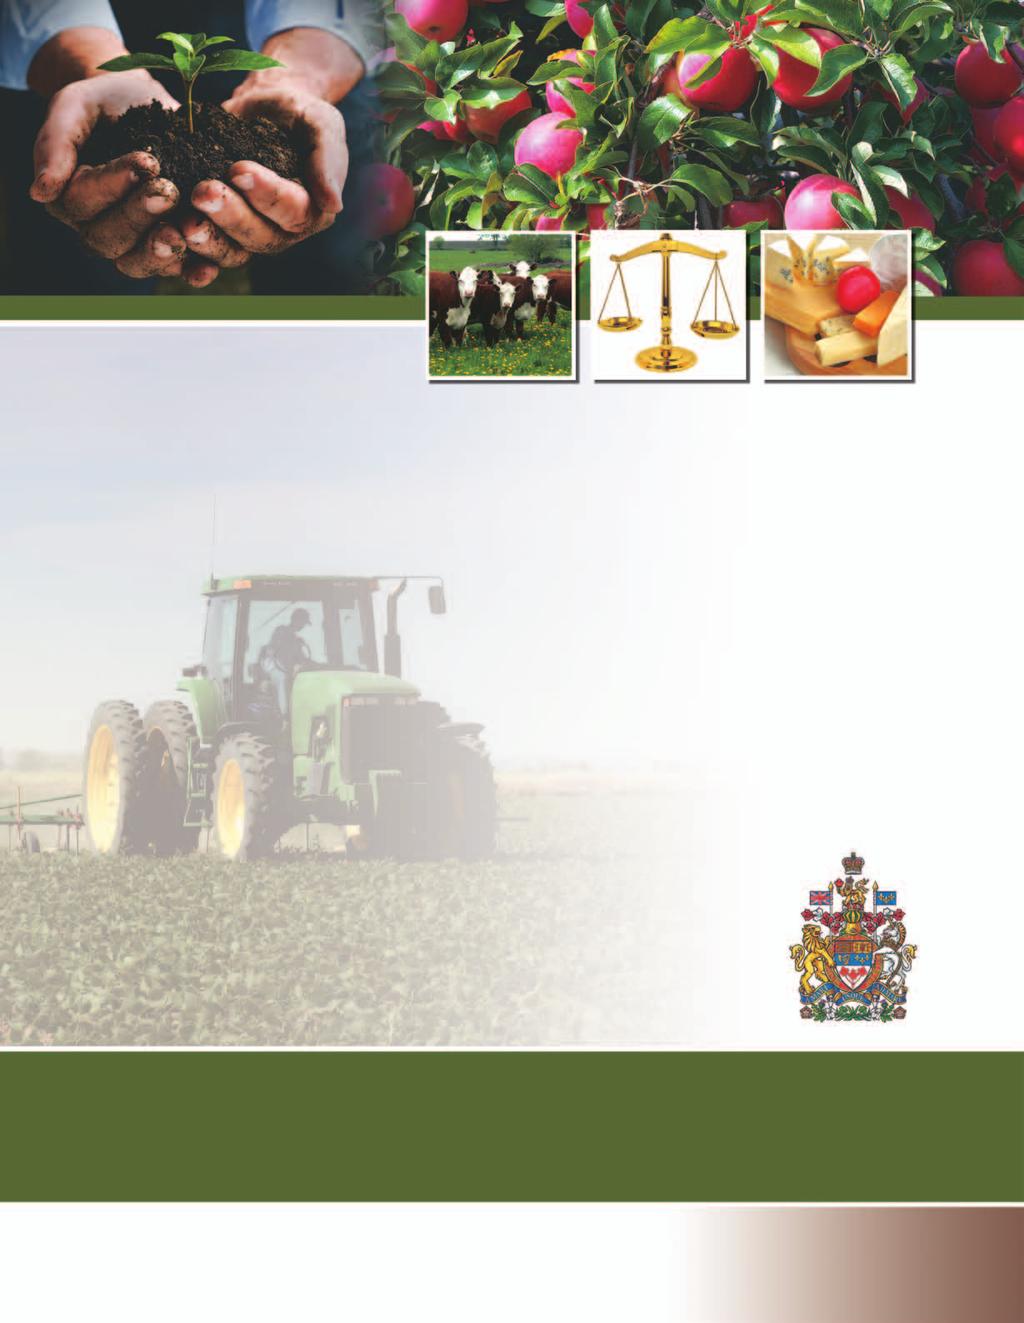 Canada Agricultural Review